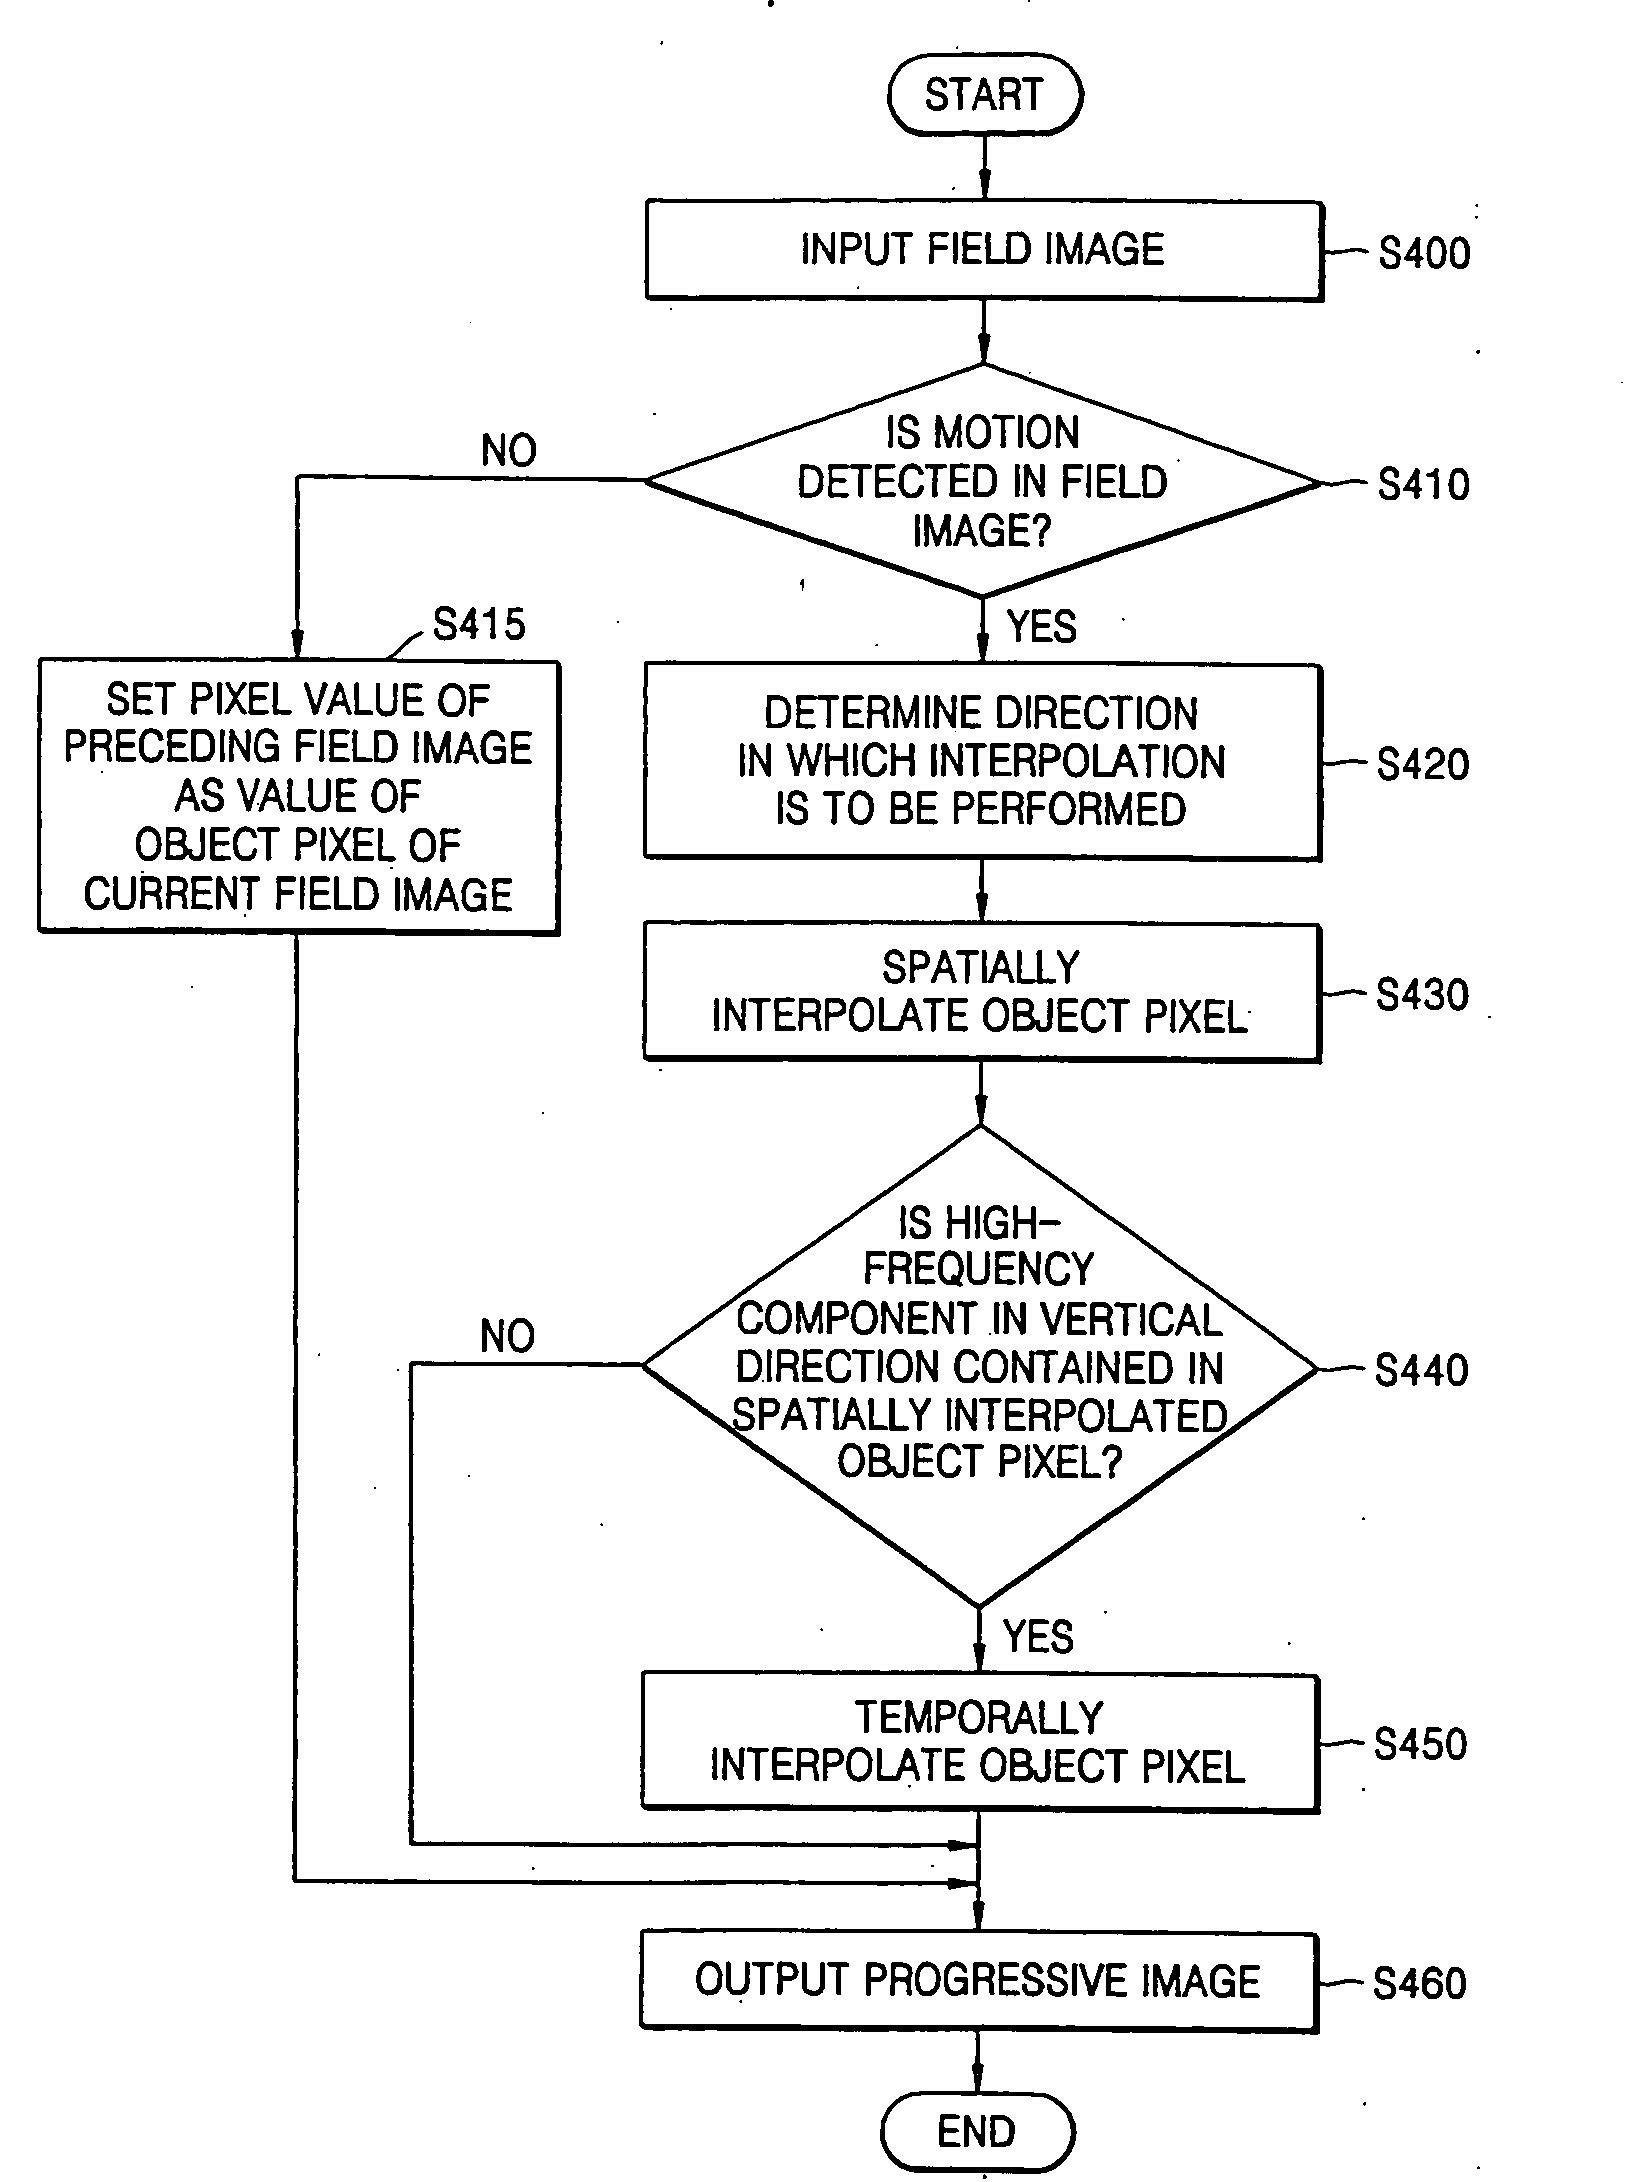 Apparatus and method for converting interlaced image into progressive image